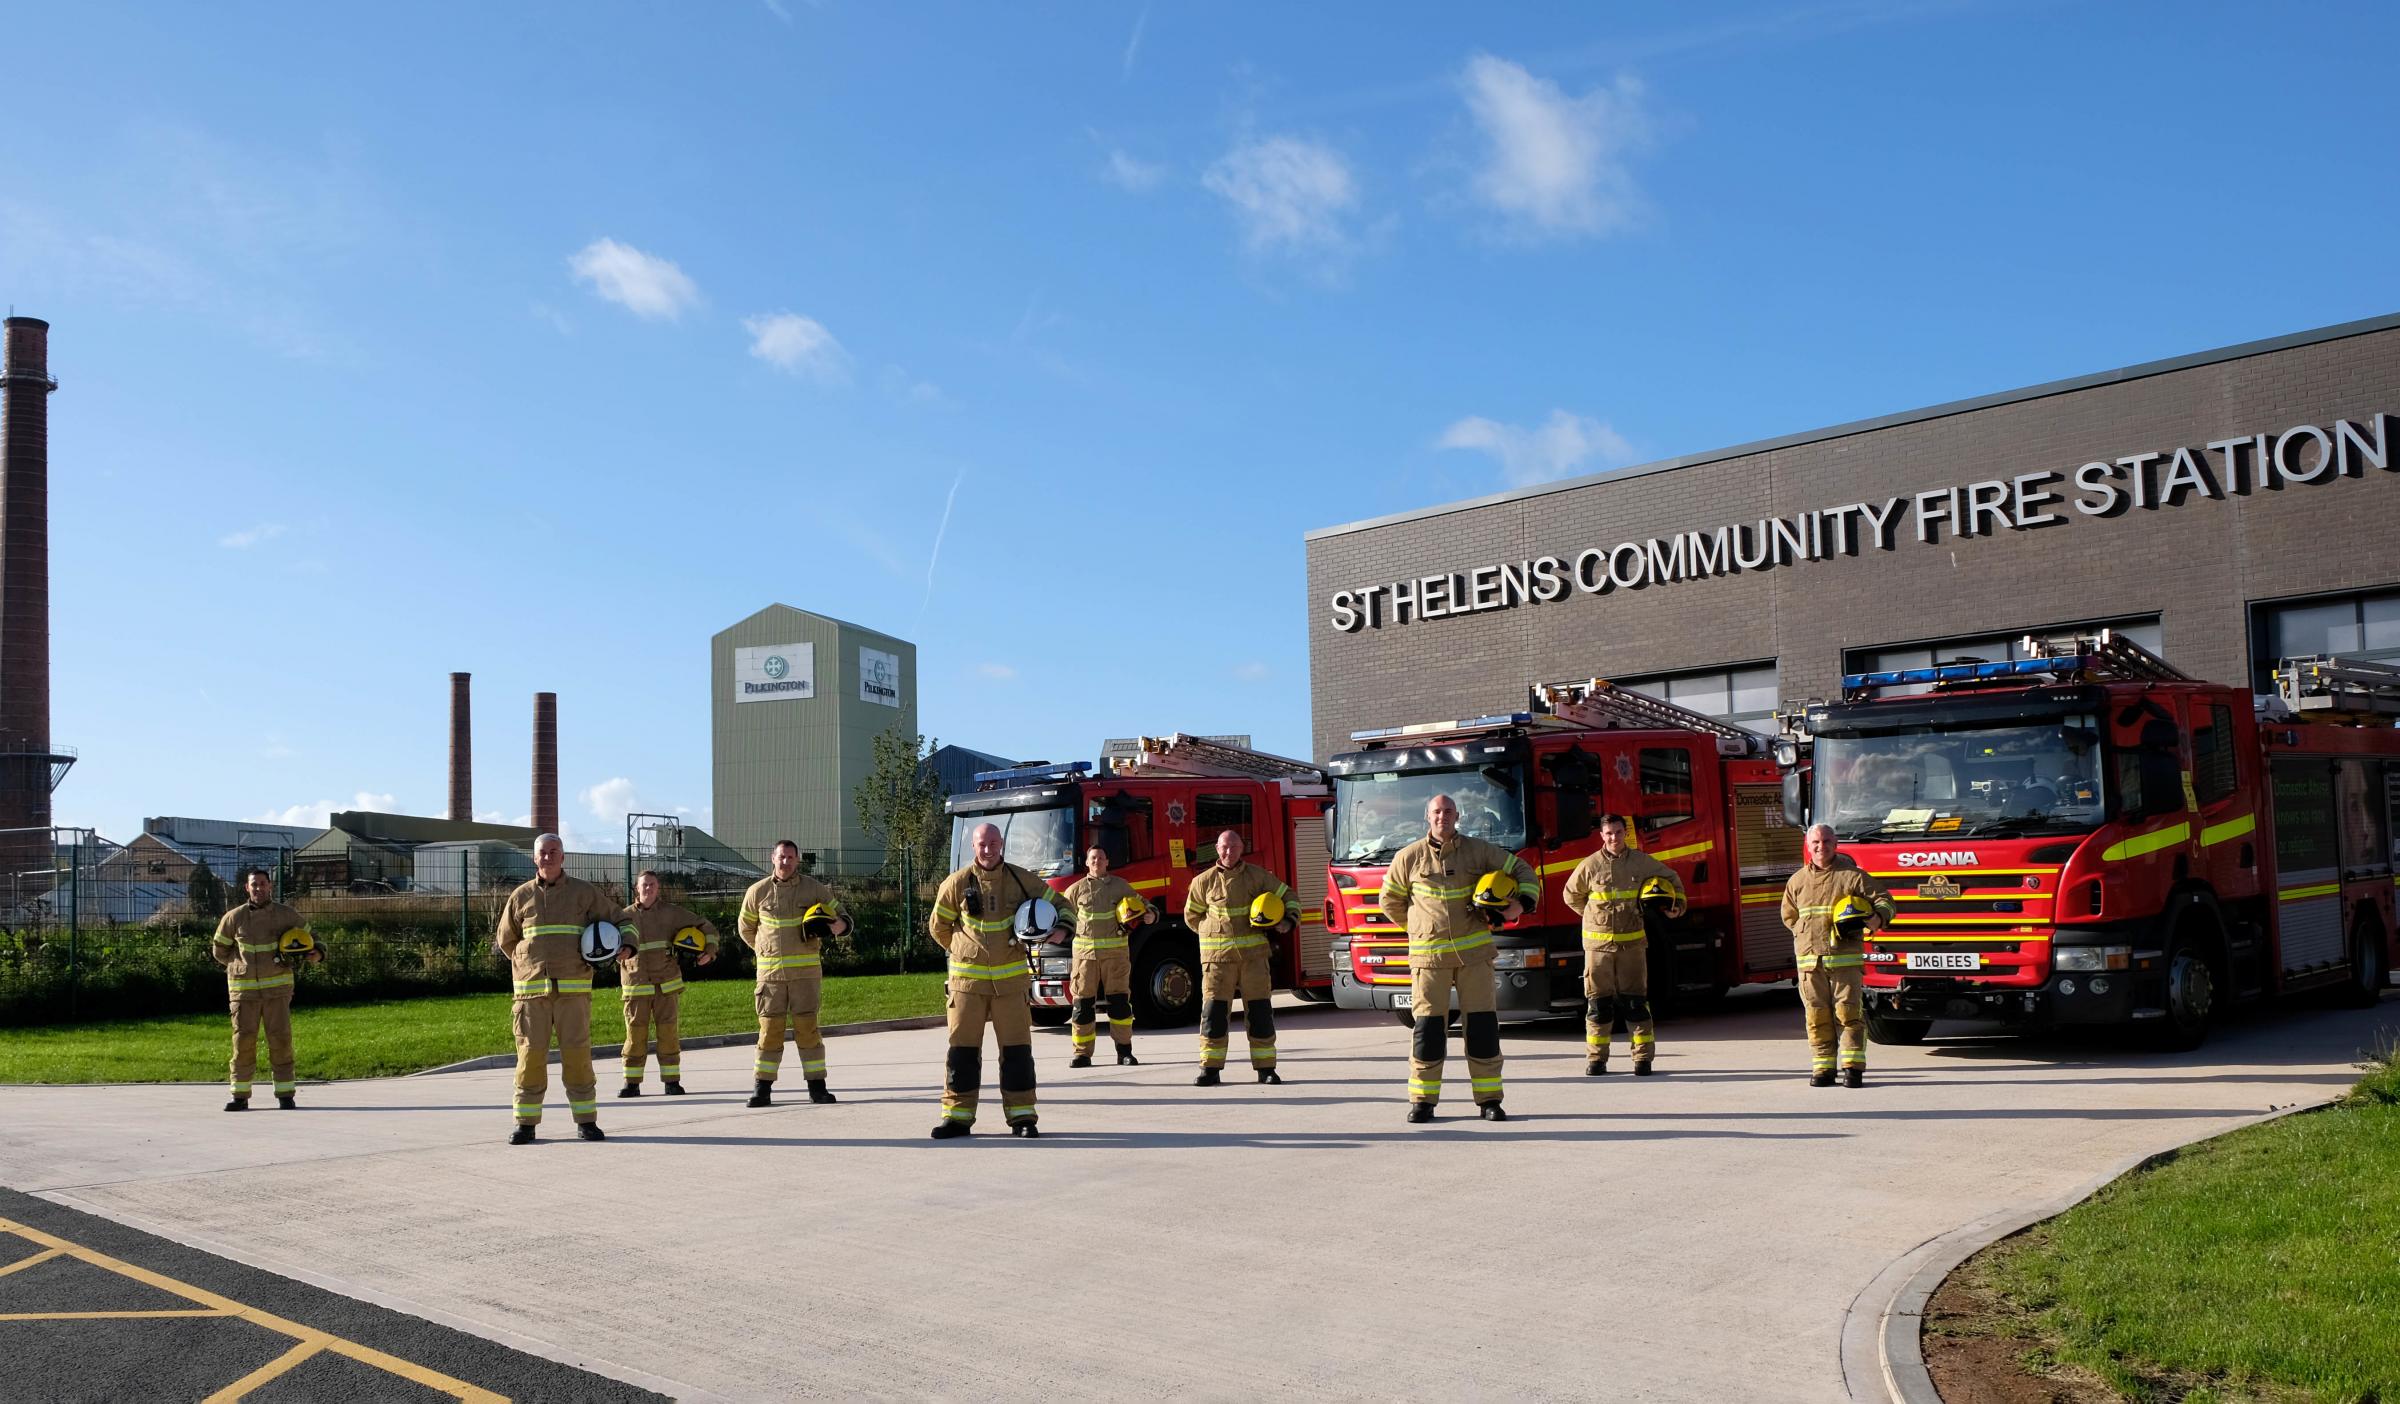 Firefighters at St Helens Community Fire Station